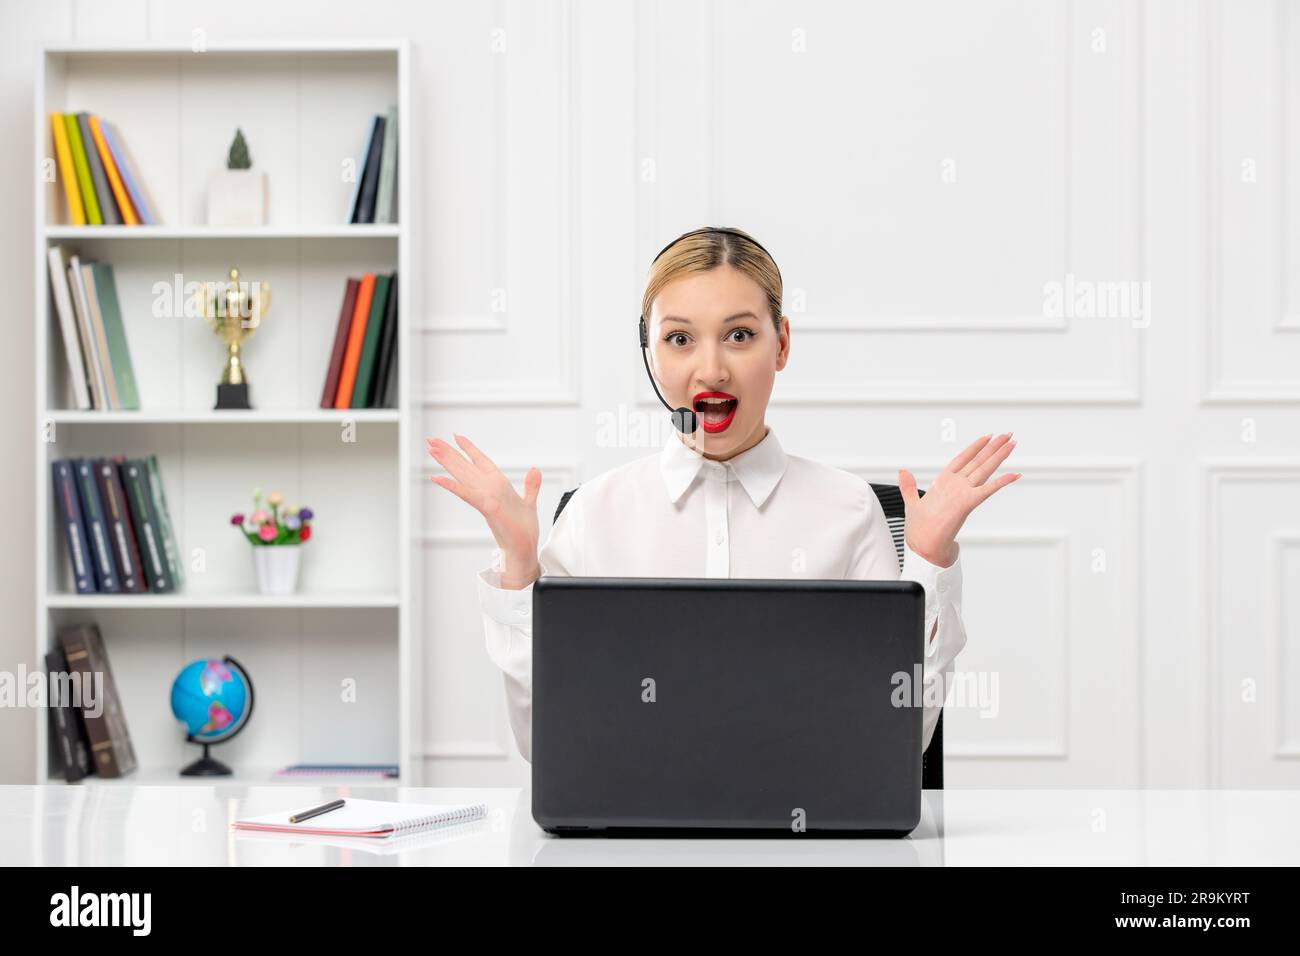 customer service cute woman in white shirt with headset and computer annoyed waving hands Stock Photo